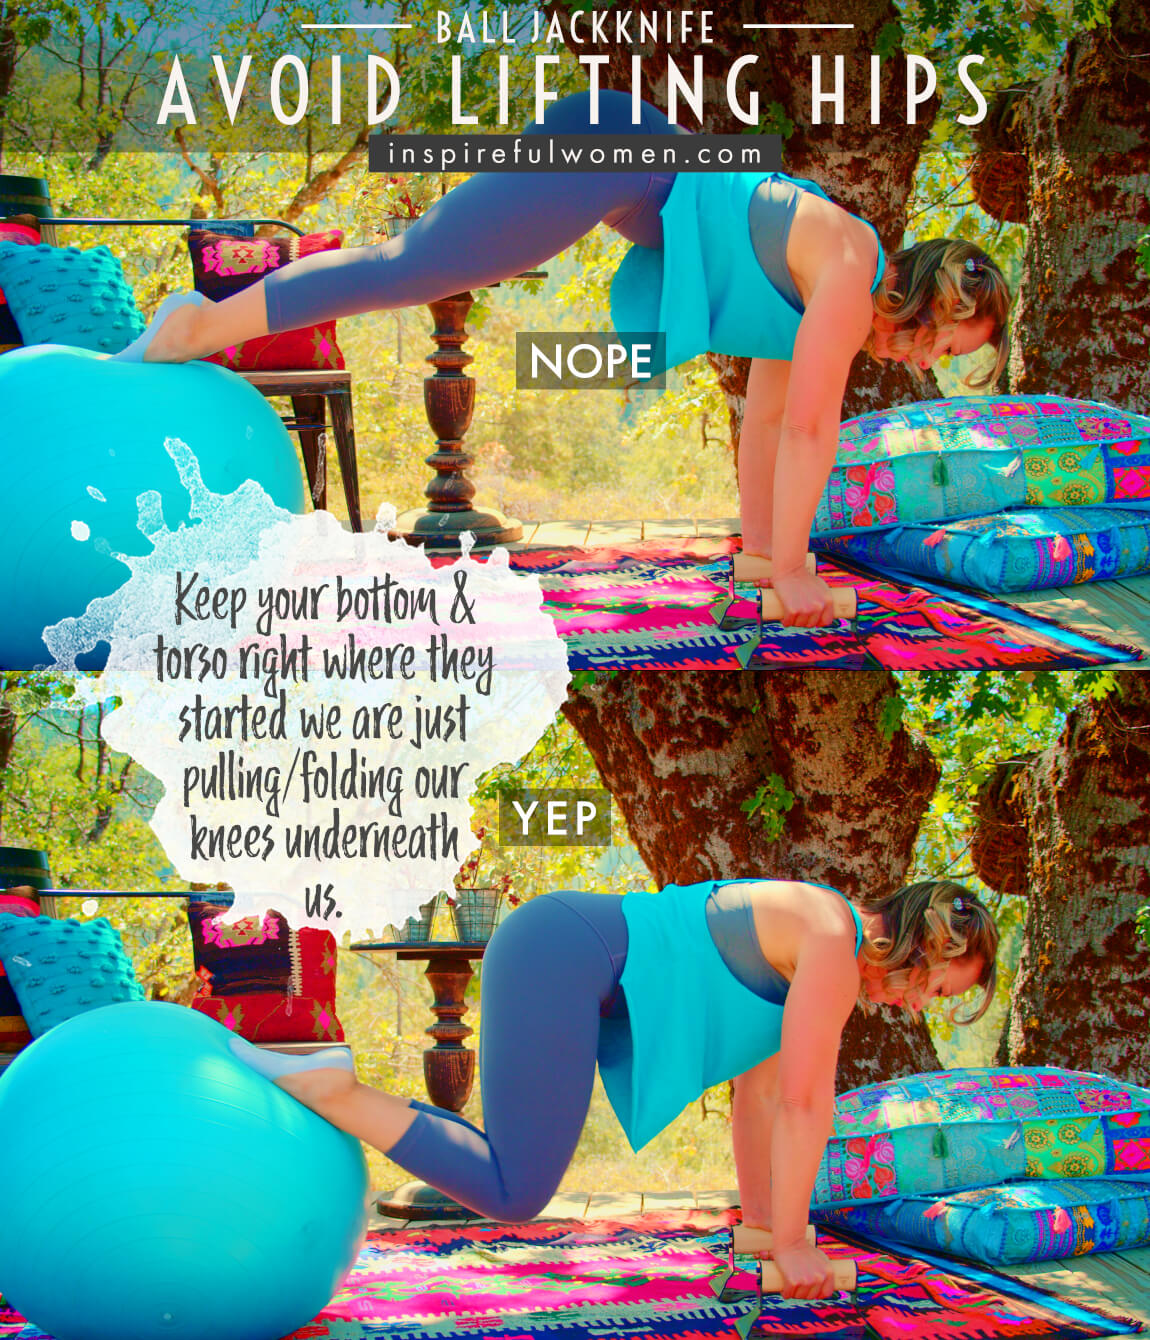 avoid-lifting-hips-stability-ball-jackknife-neutral-spine-core-exercise-common-mistakes